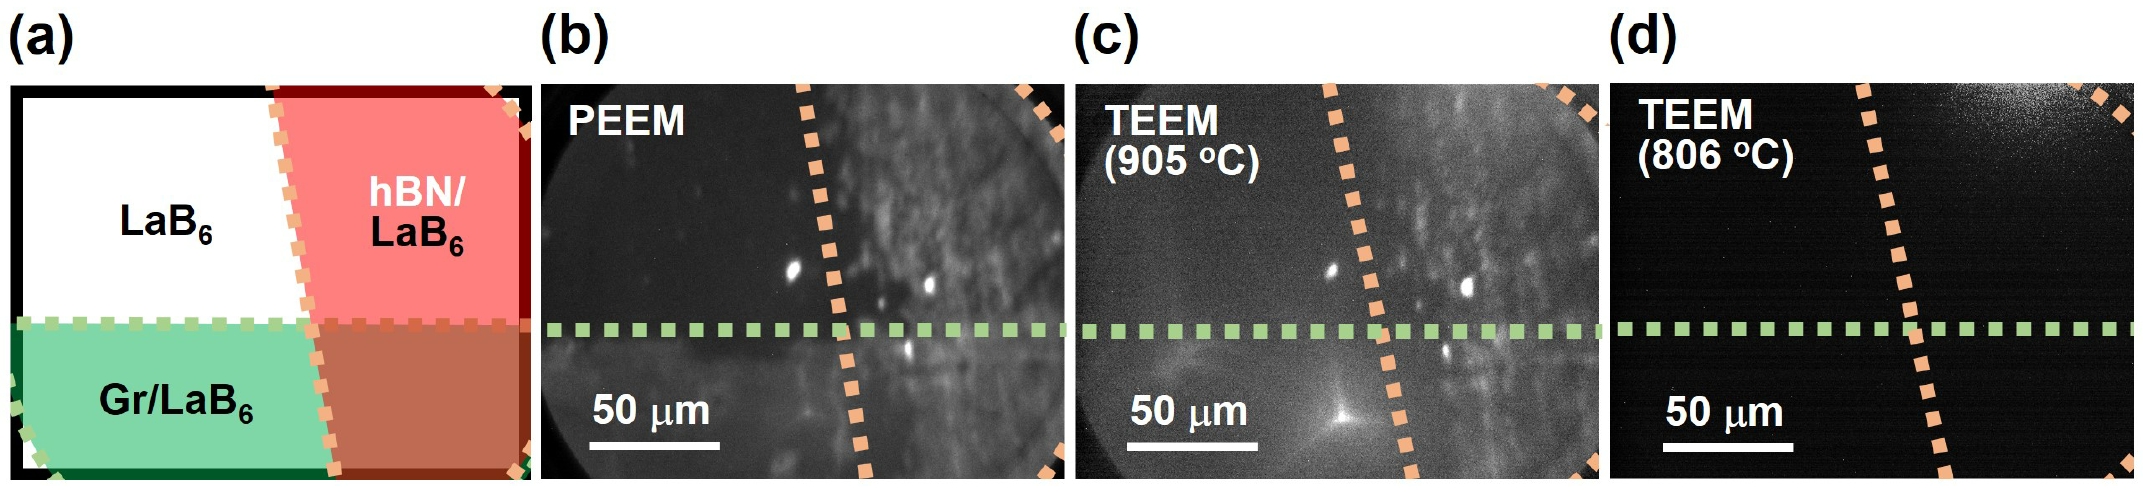 Photoemission electron microscopy (PEEM) and thermal electron emission microscopy (TEEM) images of LaB6 surface coated with graphene (Gr) and hBN